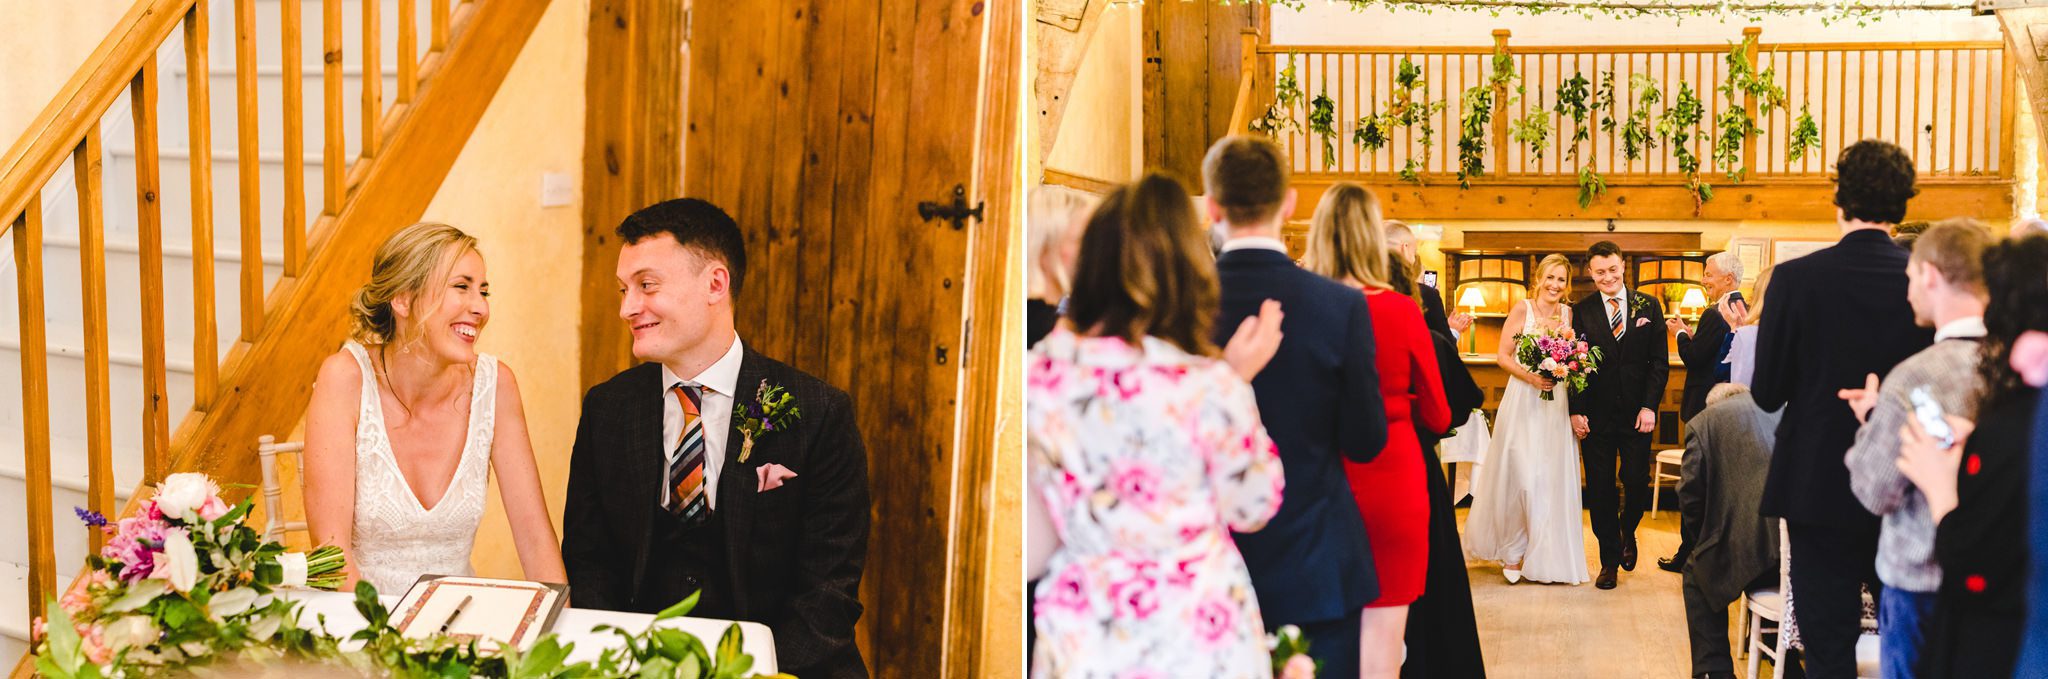 Wedding ceremony at Owlpen Manor by Bigeye Photography in the Cider Barn